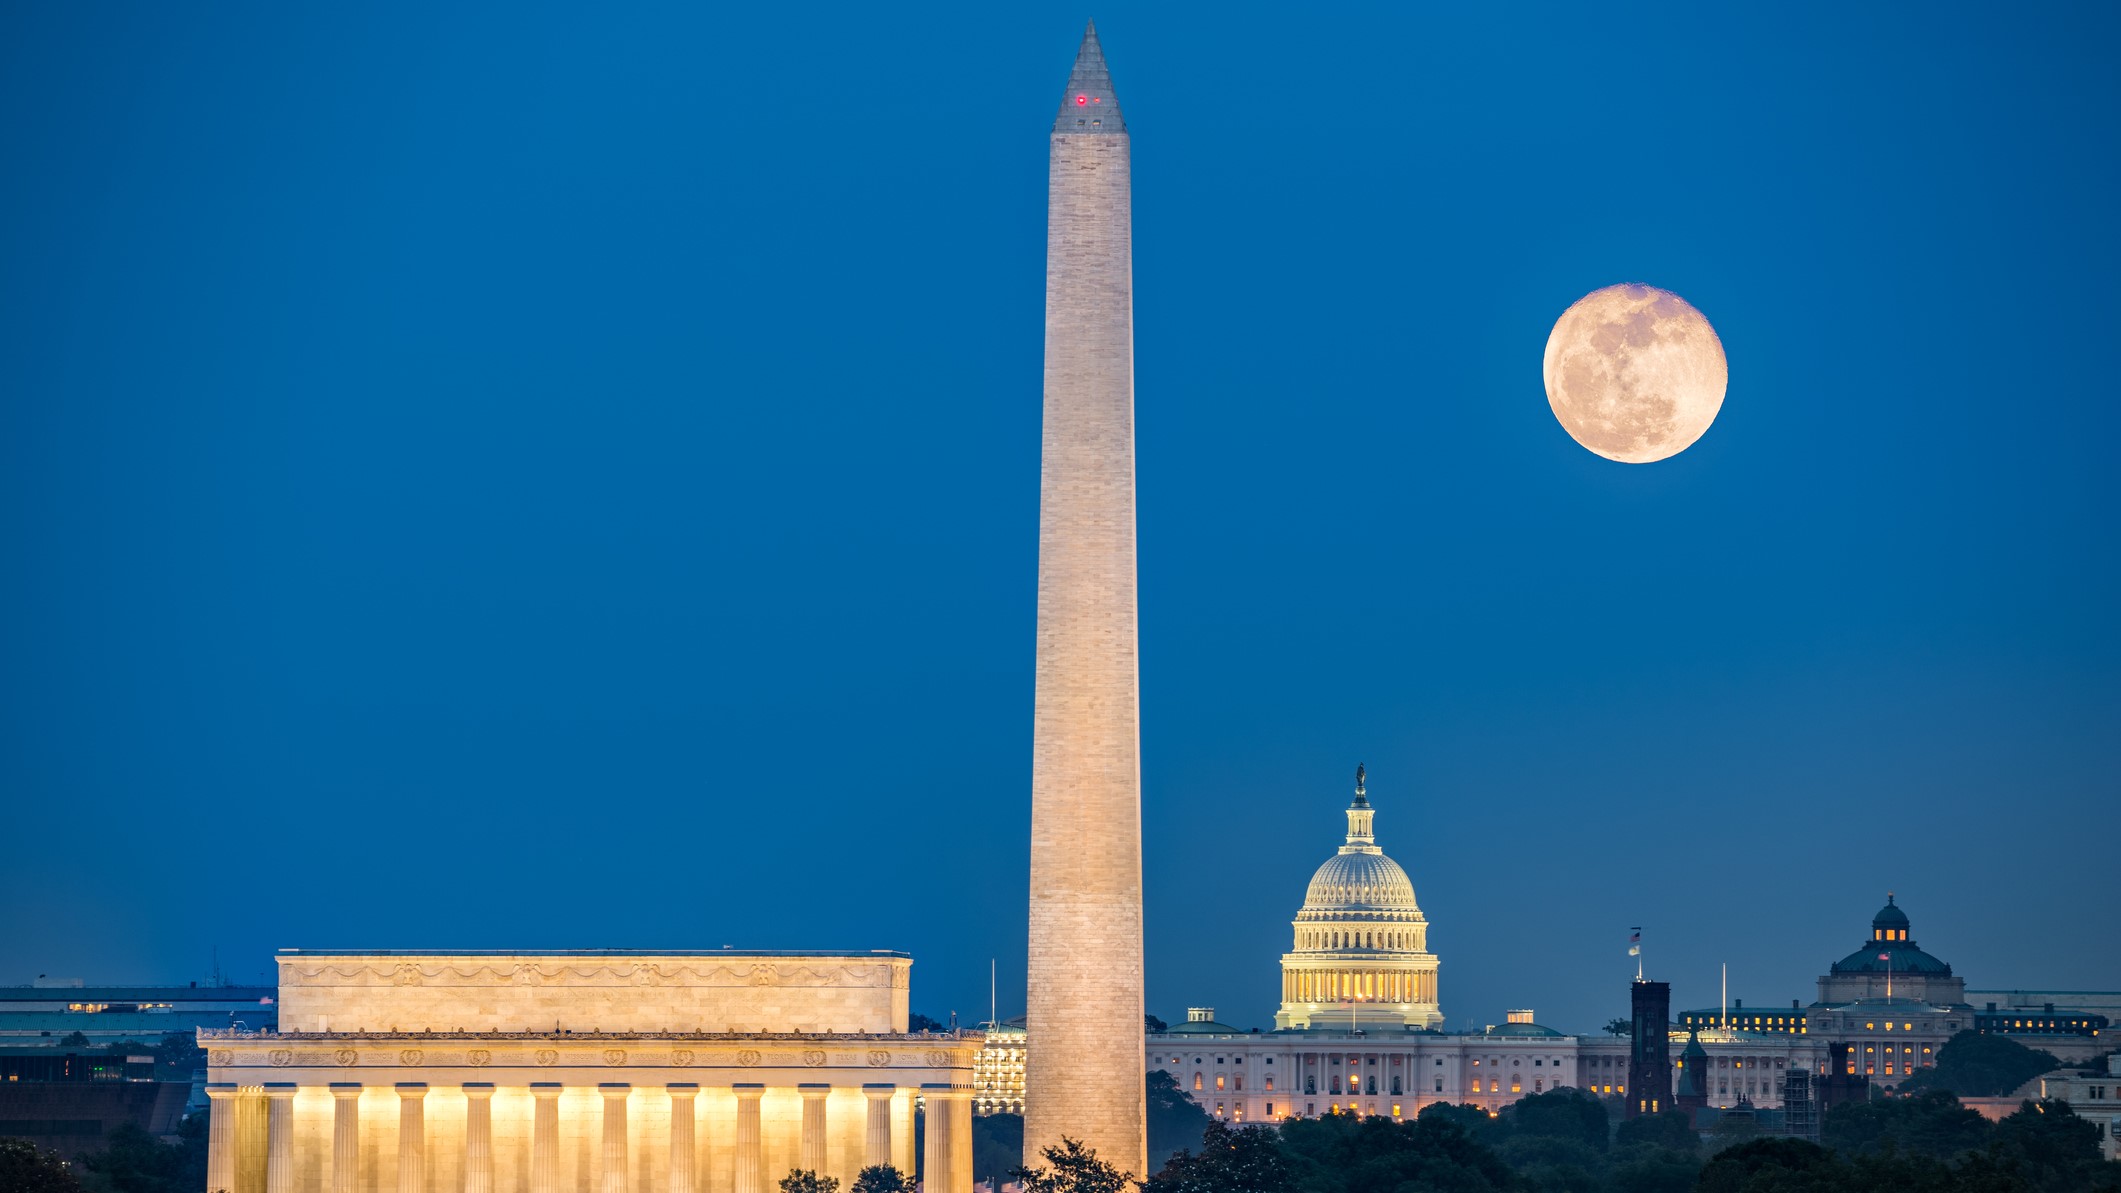 A large moon in sky above the Lincoln Memorial, Washington Monument and Capitol Building in Washington DC.